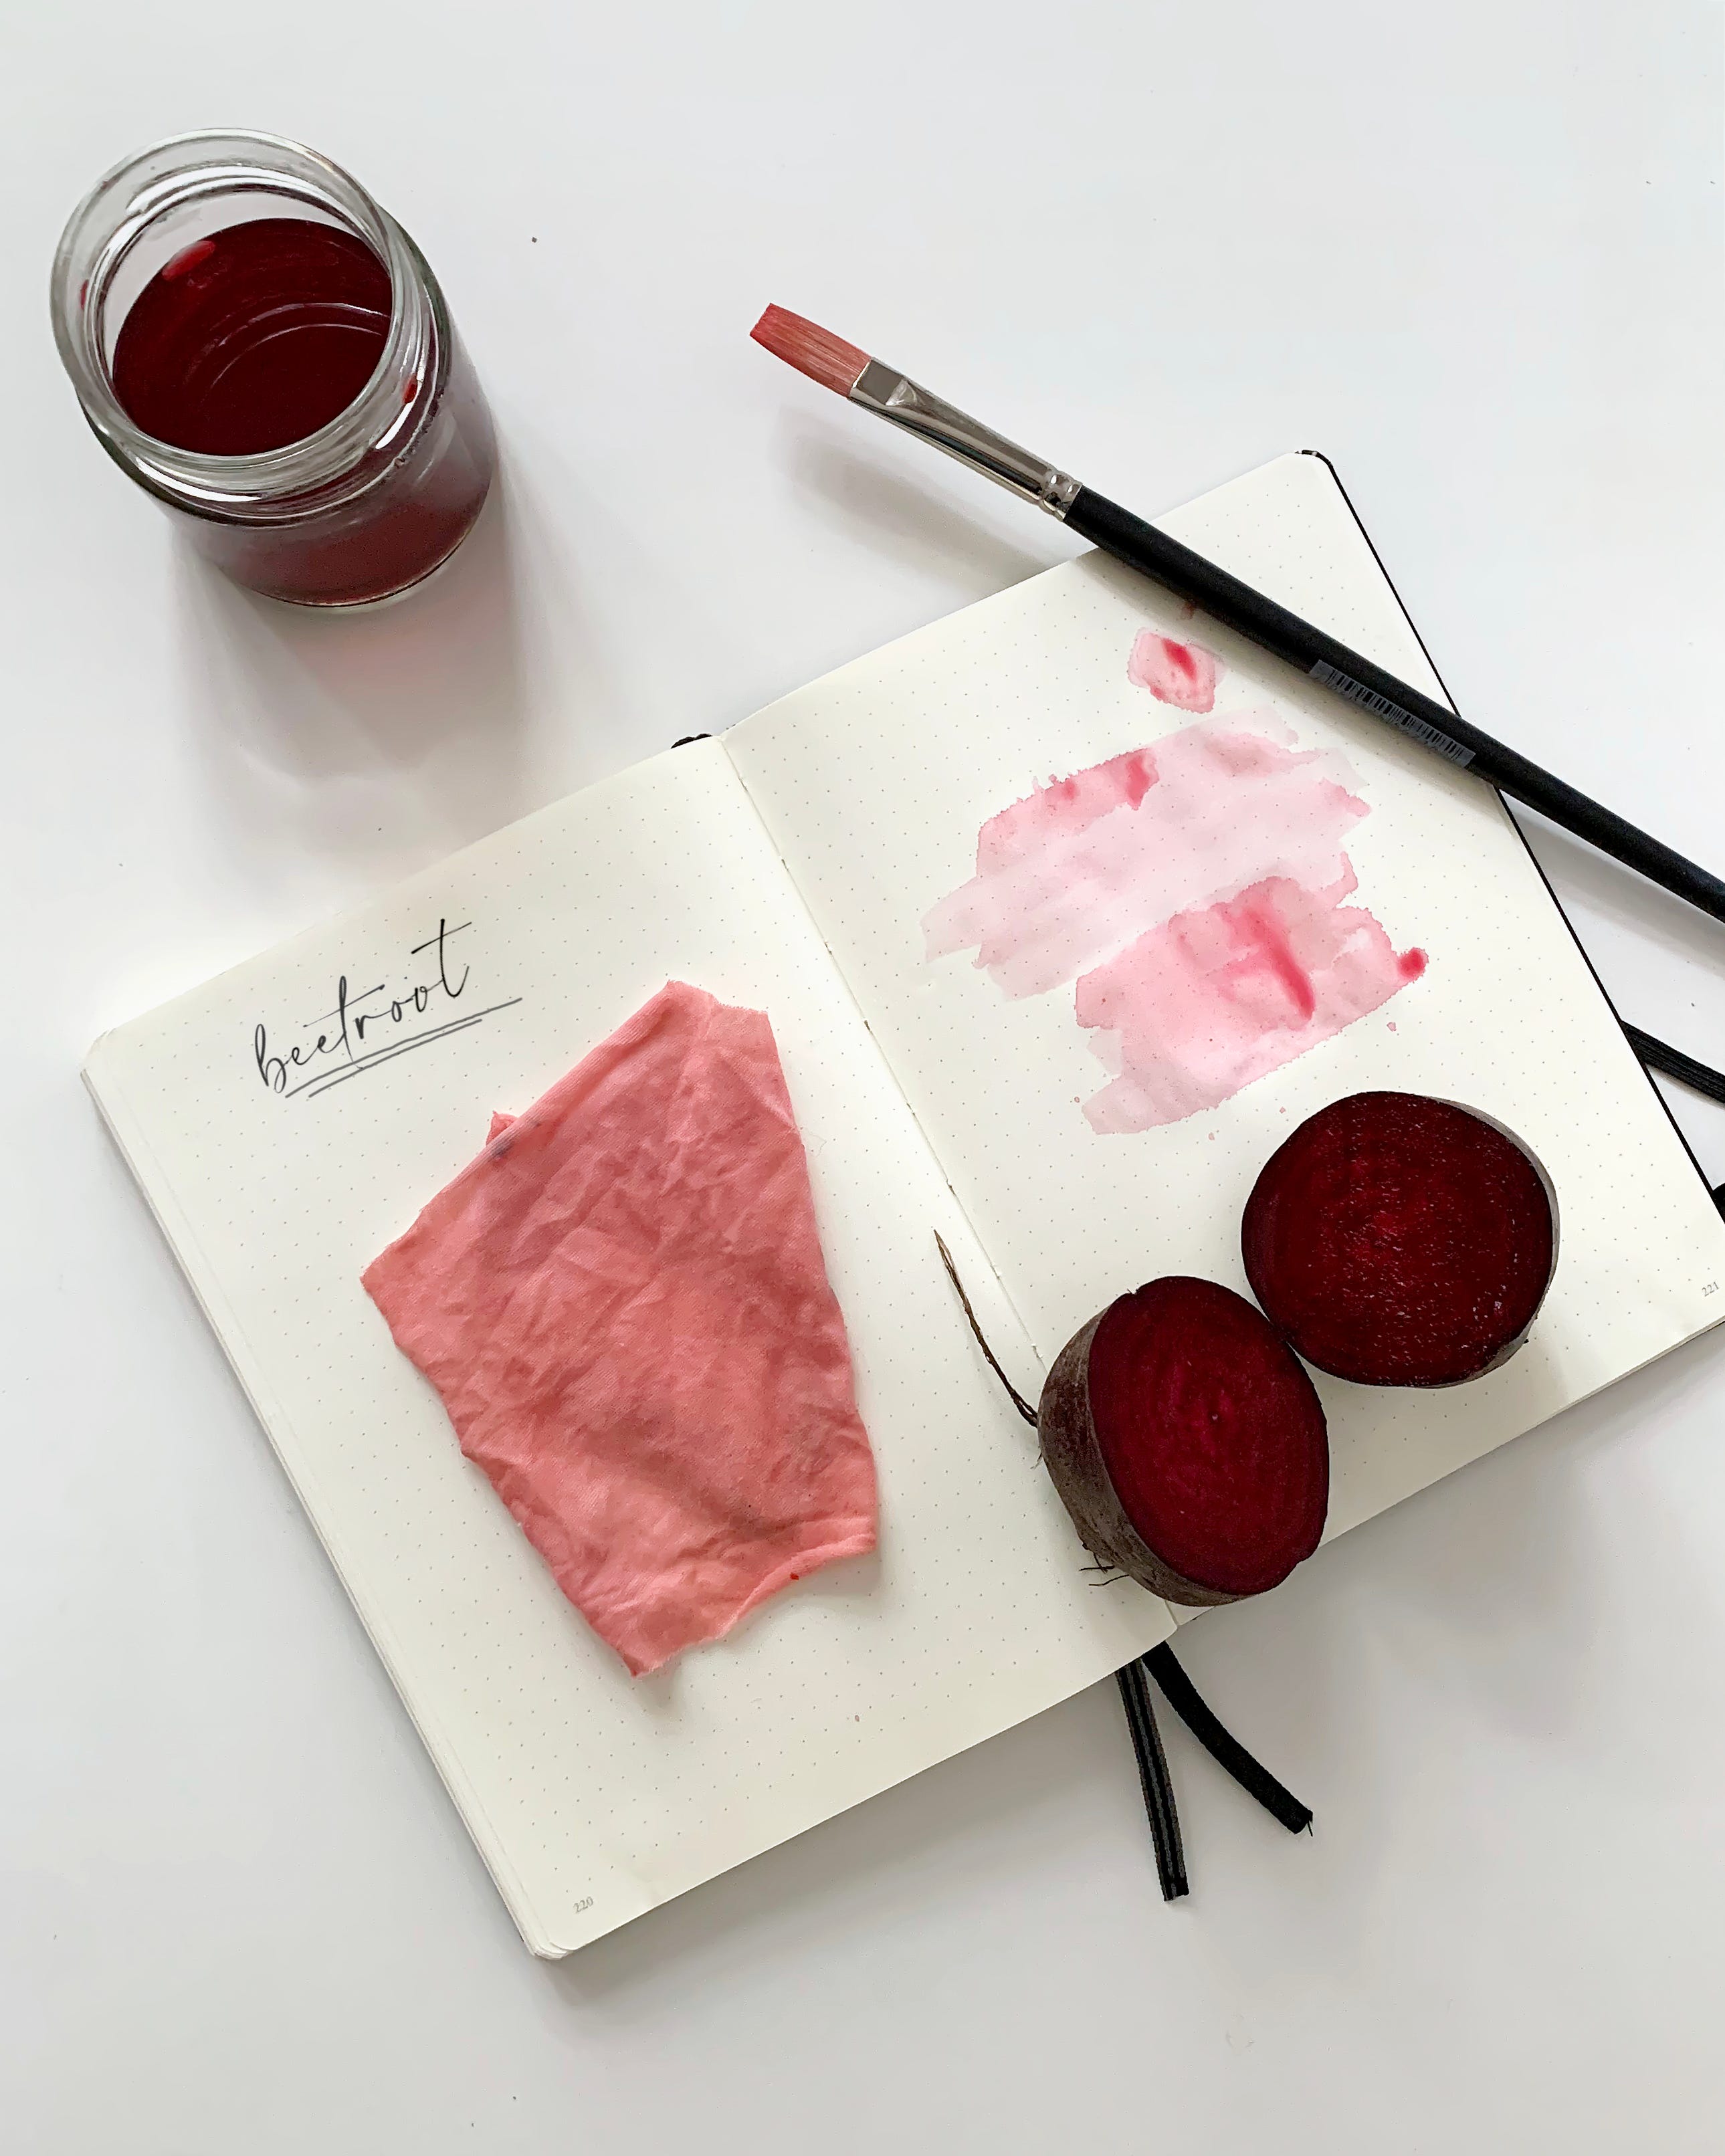 How to Dye Fabric with Beets: 14 Steps (with Pictures) - wikiHow